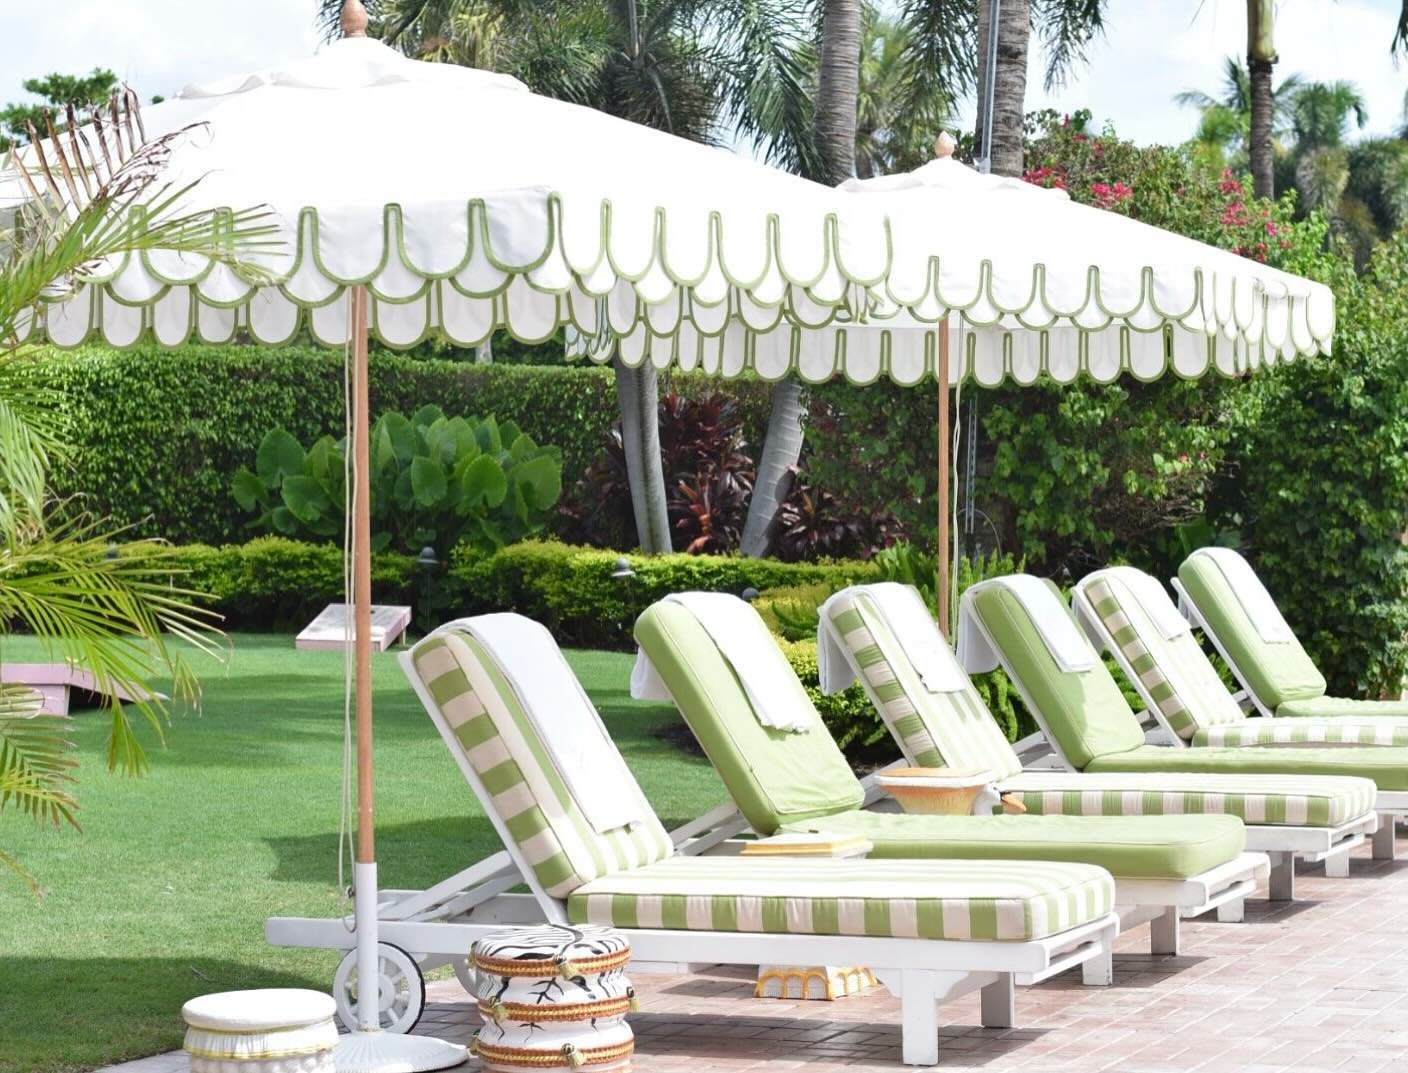 What&rsquo;s your outdoor design style? Hamptons? Resort? Palm Beach? Playful? LA Country Club? Scottsdale Desert Chic? A walk in the park? Majestic mountain views? #share #dotell #comment #outdoors 

Image c/o Planes, Trains, and Champagne